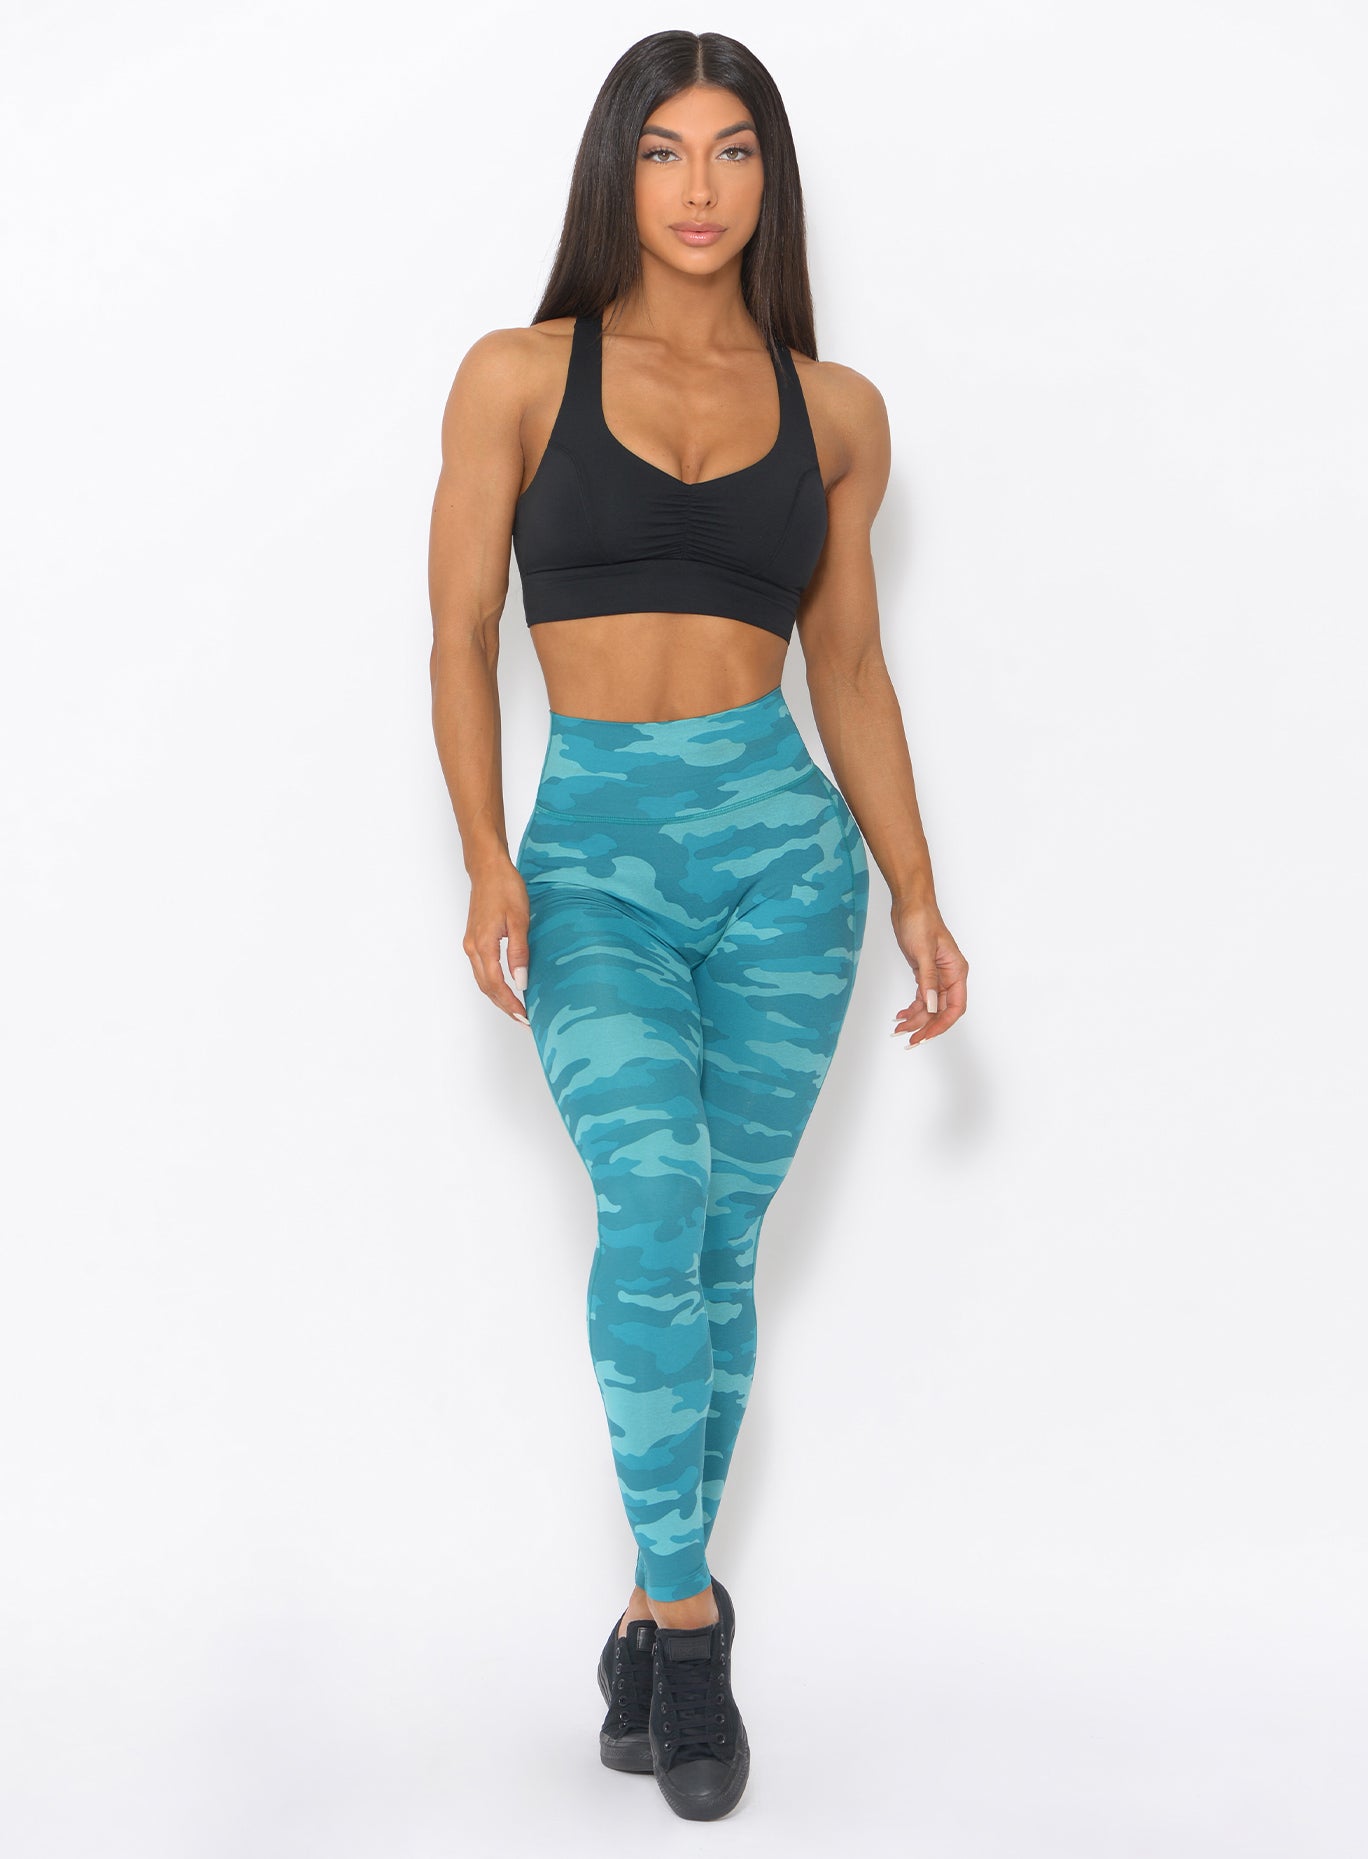 Front profile view of the model wearing our fit camo leggings in teal color and a black sports bra